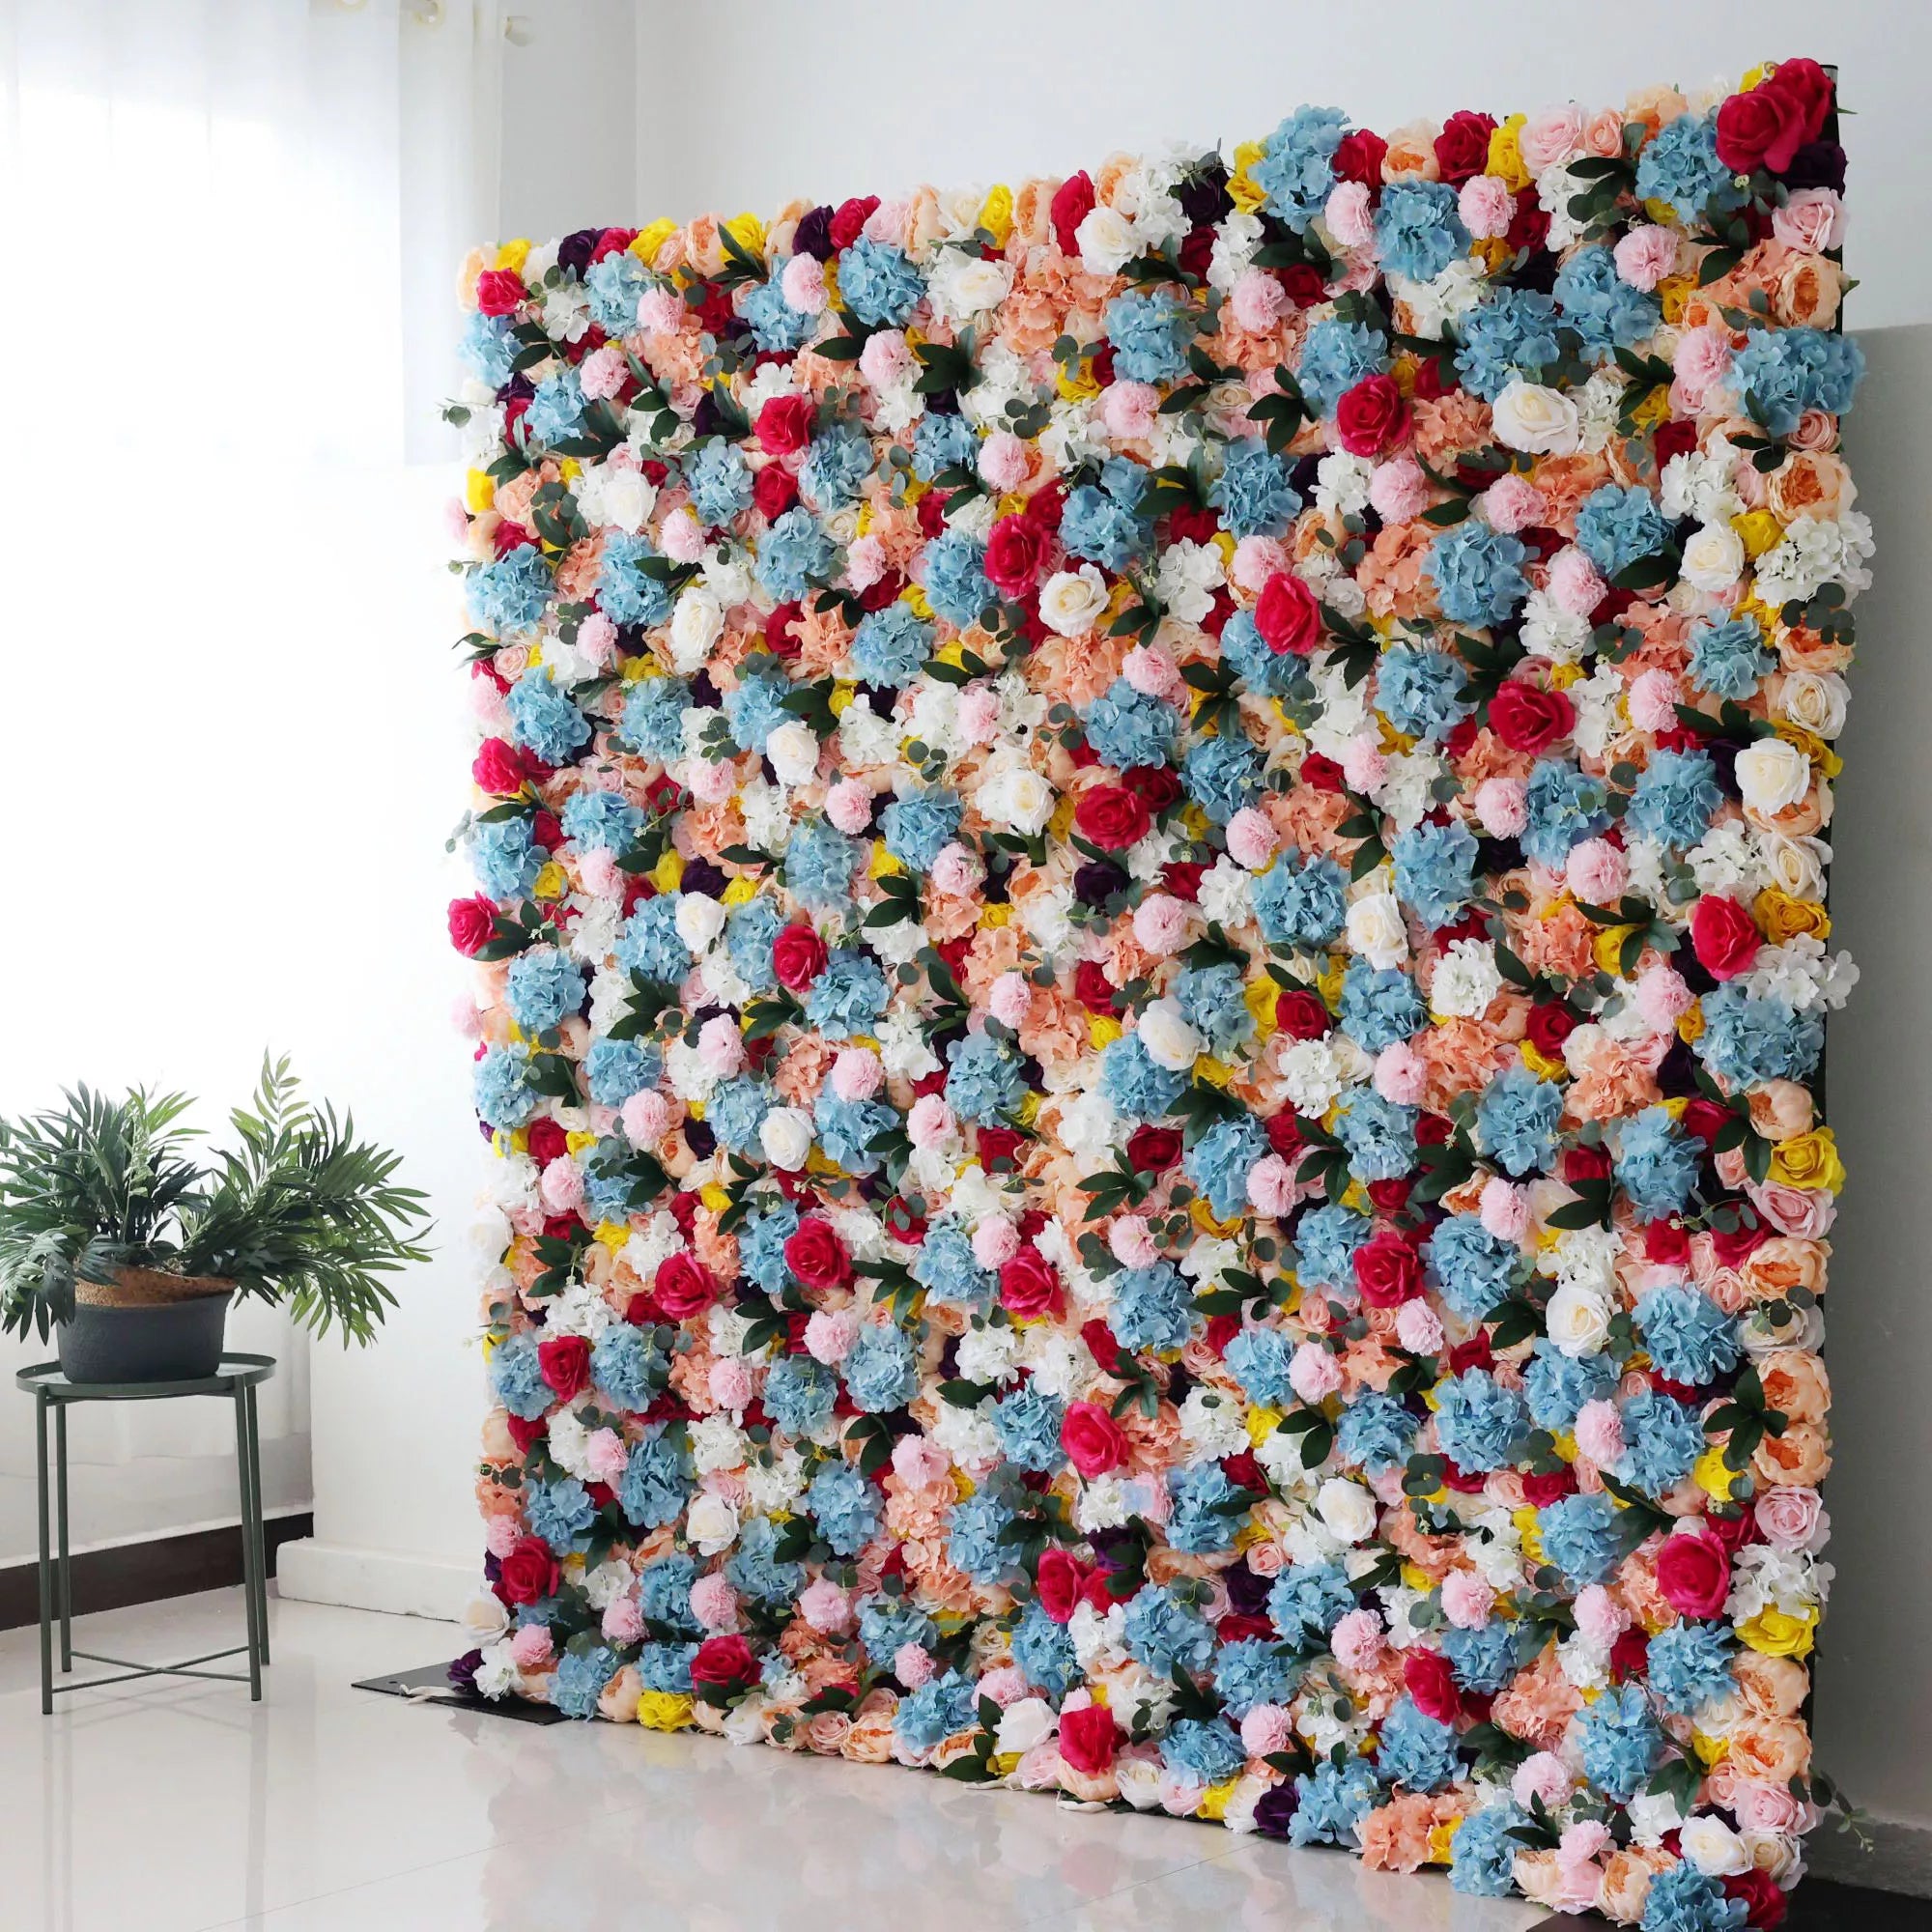 ValarFlowers Backdrop: Embrace the Blooming Spectrum. A tapestry teeming with radiant roses, dainty daisies, and hues of happiness. Illuminate events with nature's colorful canvas.